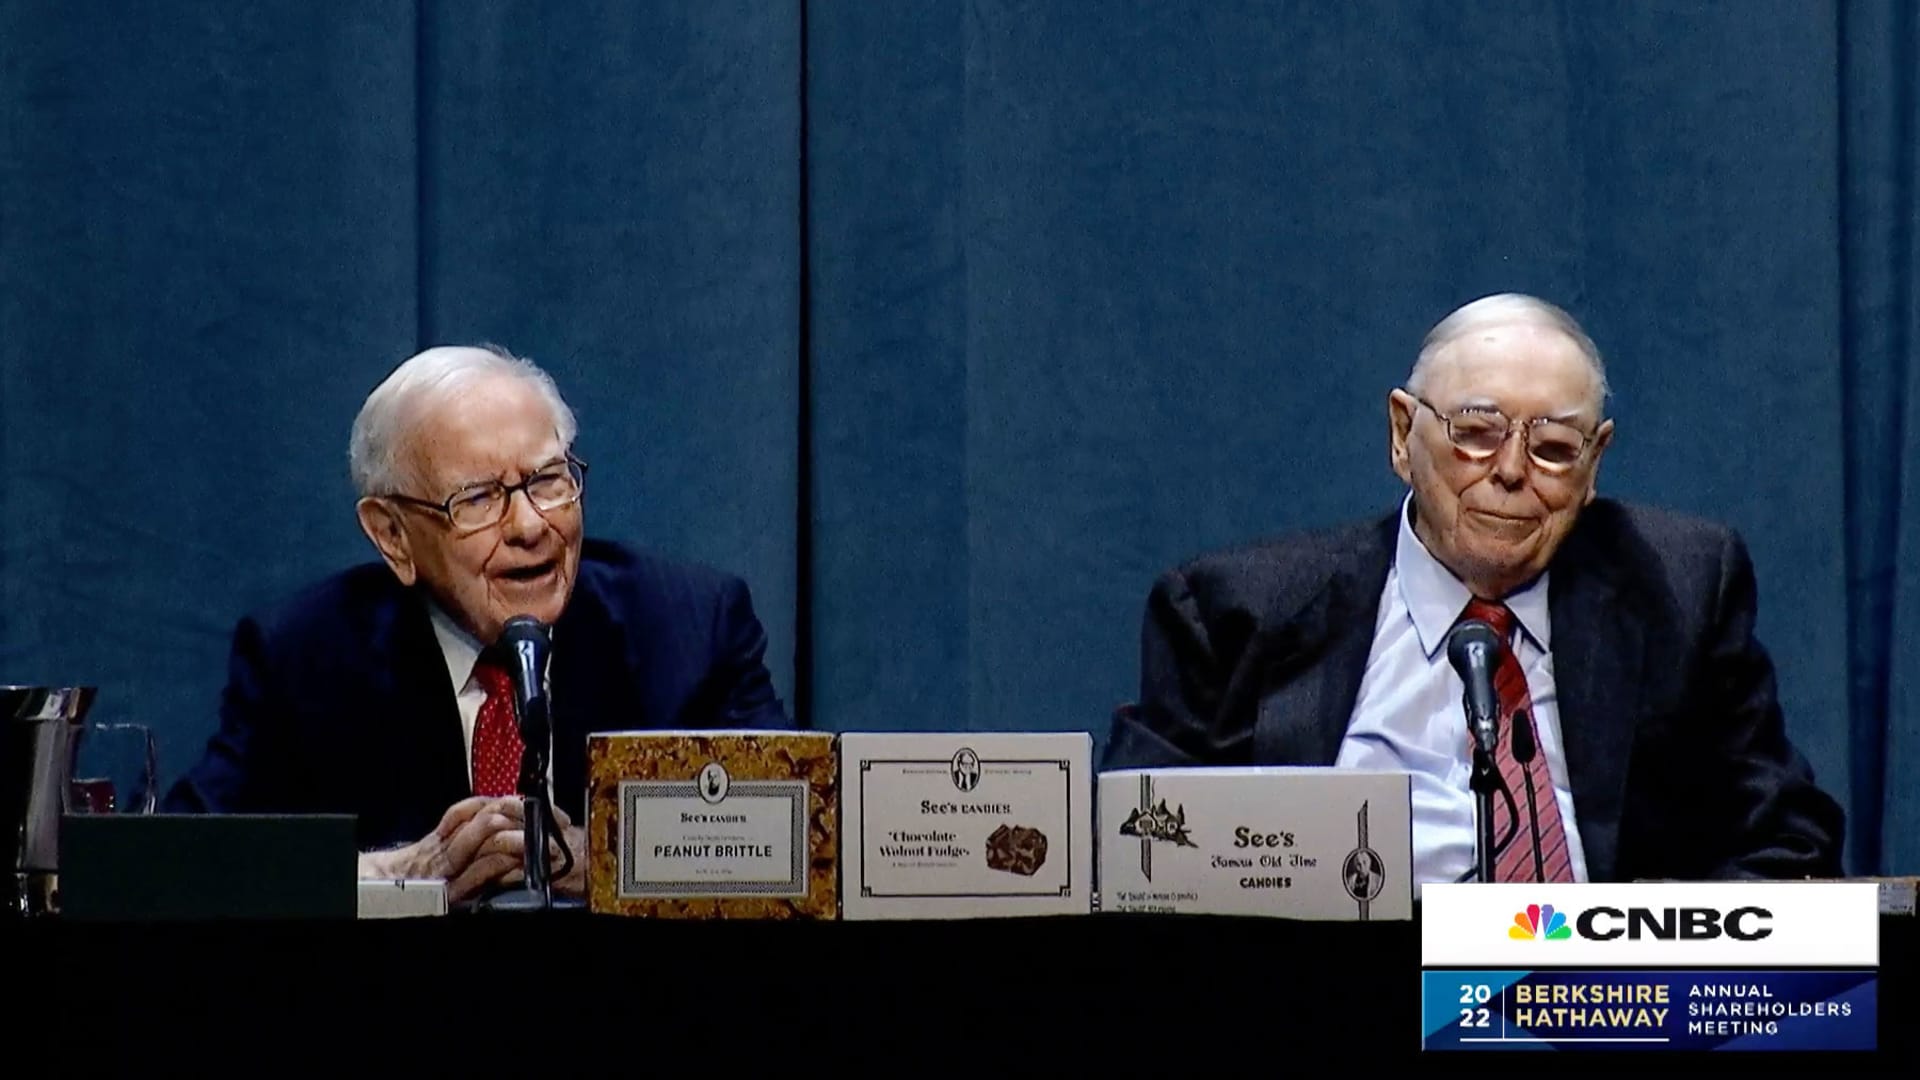 Warren Buffett claims Berkshire may possibly only do somewhat much better than the normal corporation due to its sheer measurement